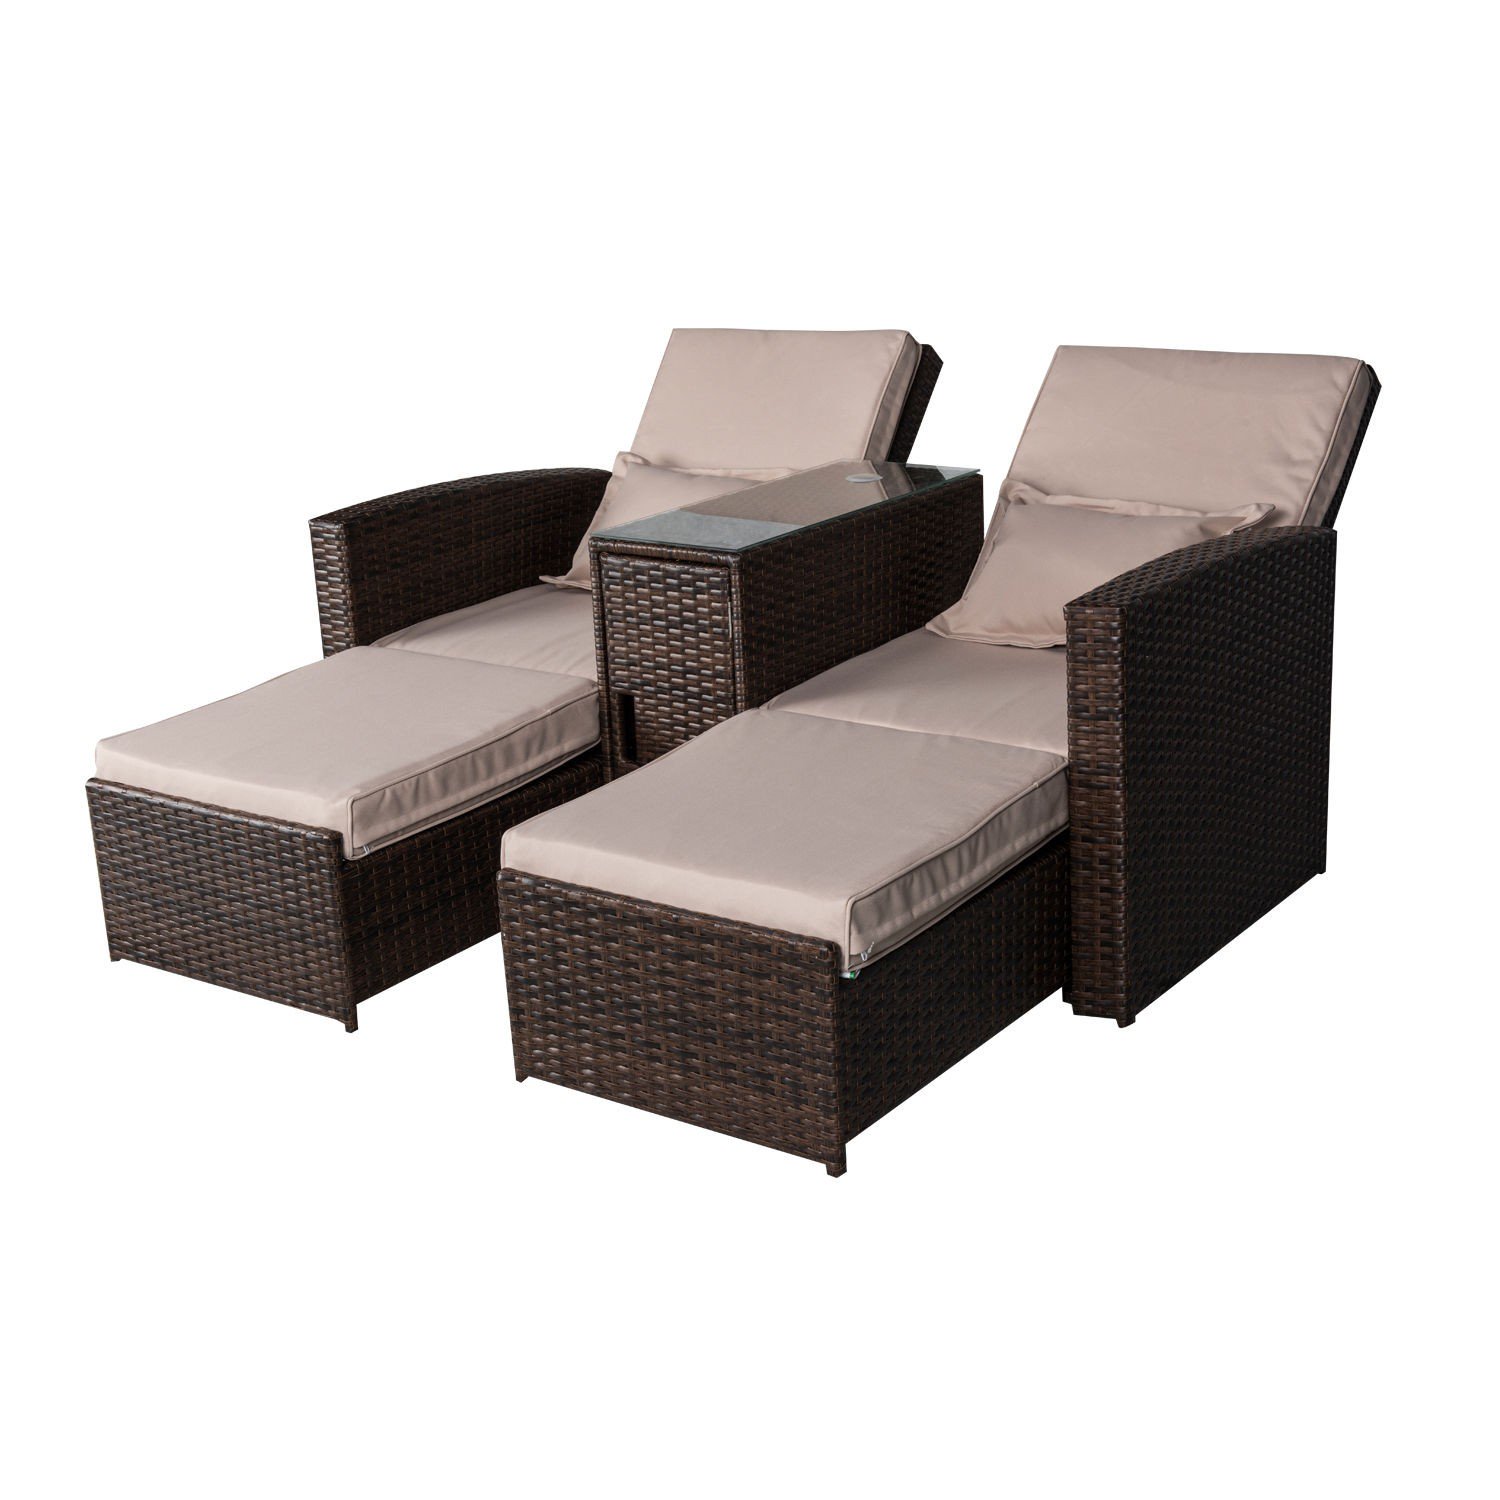 Rattan Outdoor Lounge Chair photo - 8